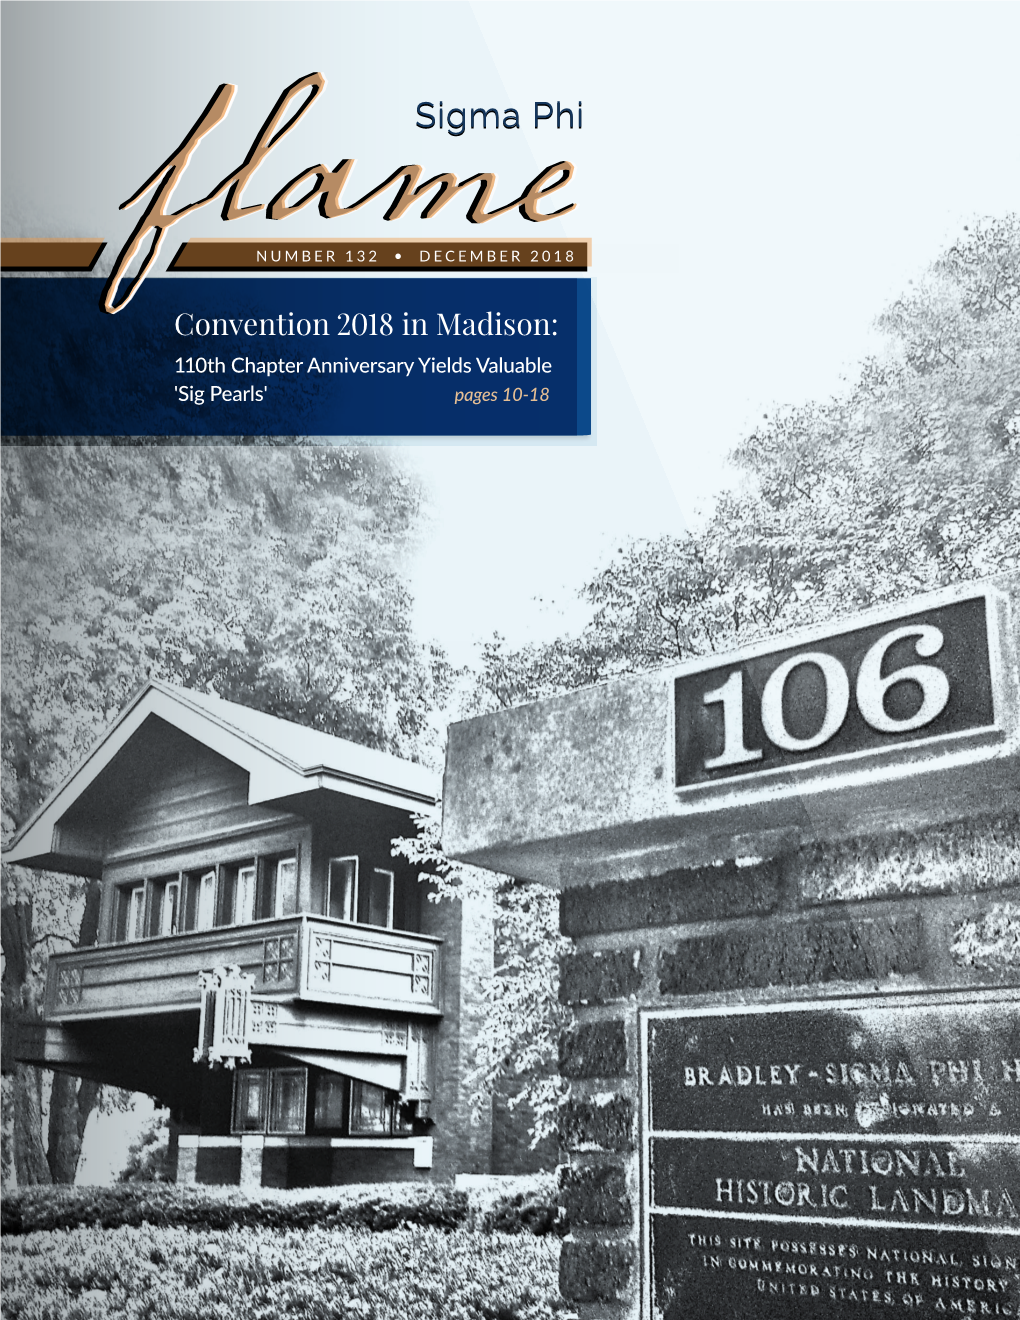 DECEMBER 2018 Flameflamefflameconvention 2018 in Madison: 110Th Chapter Anniversary Yields Valuable 'Sig Pearls' Pages 10-18